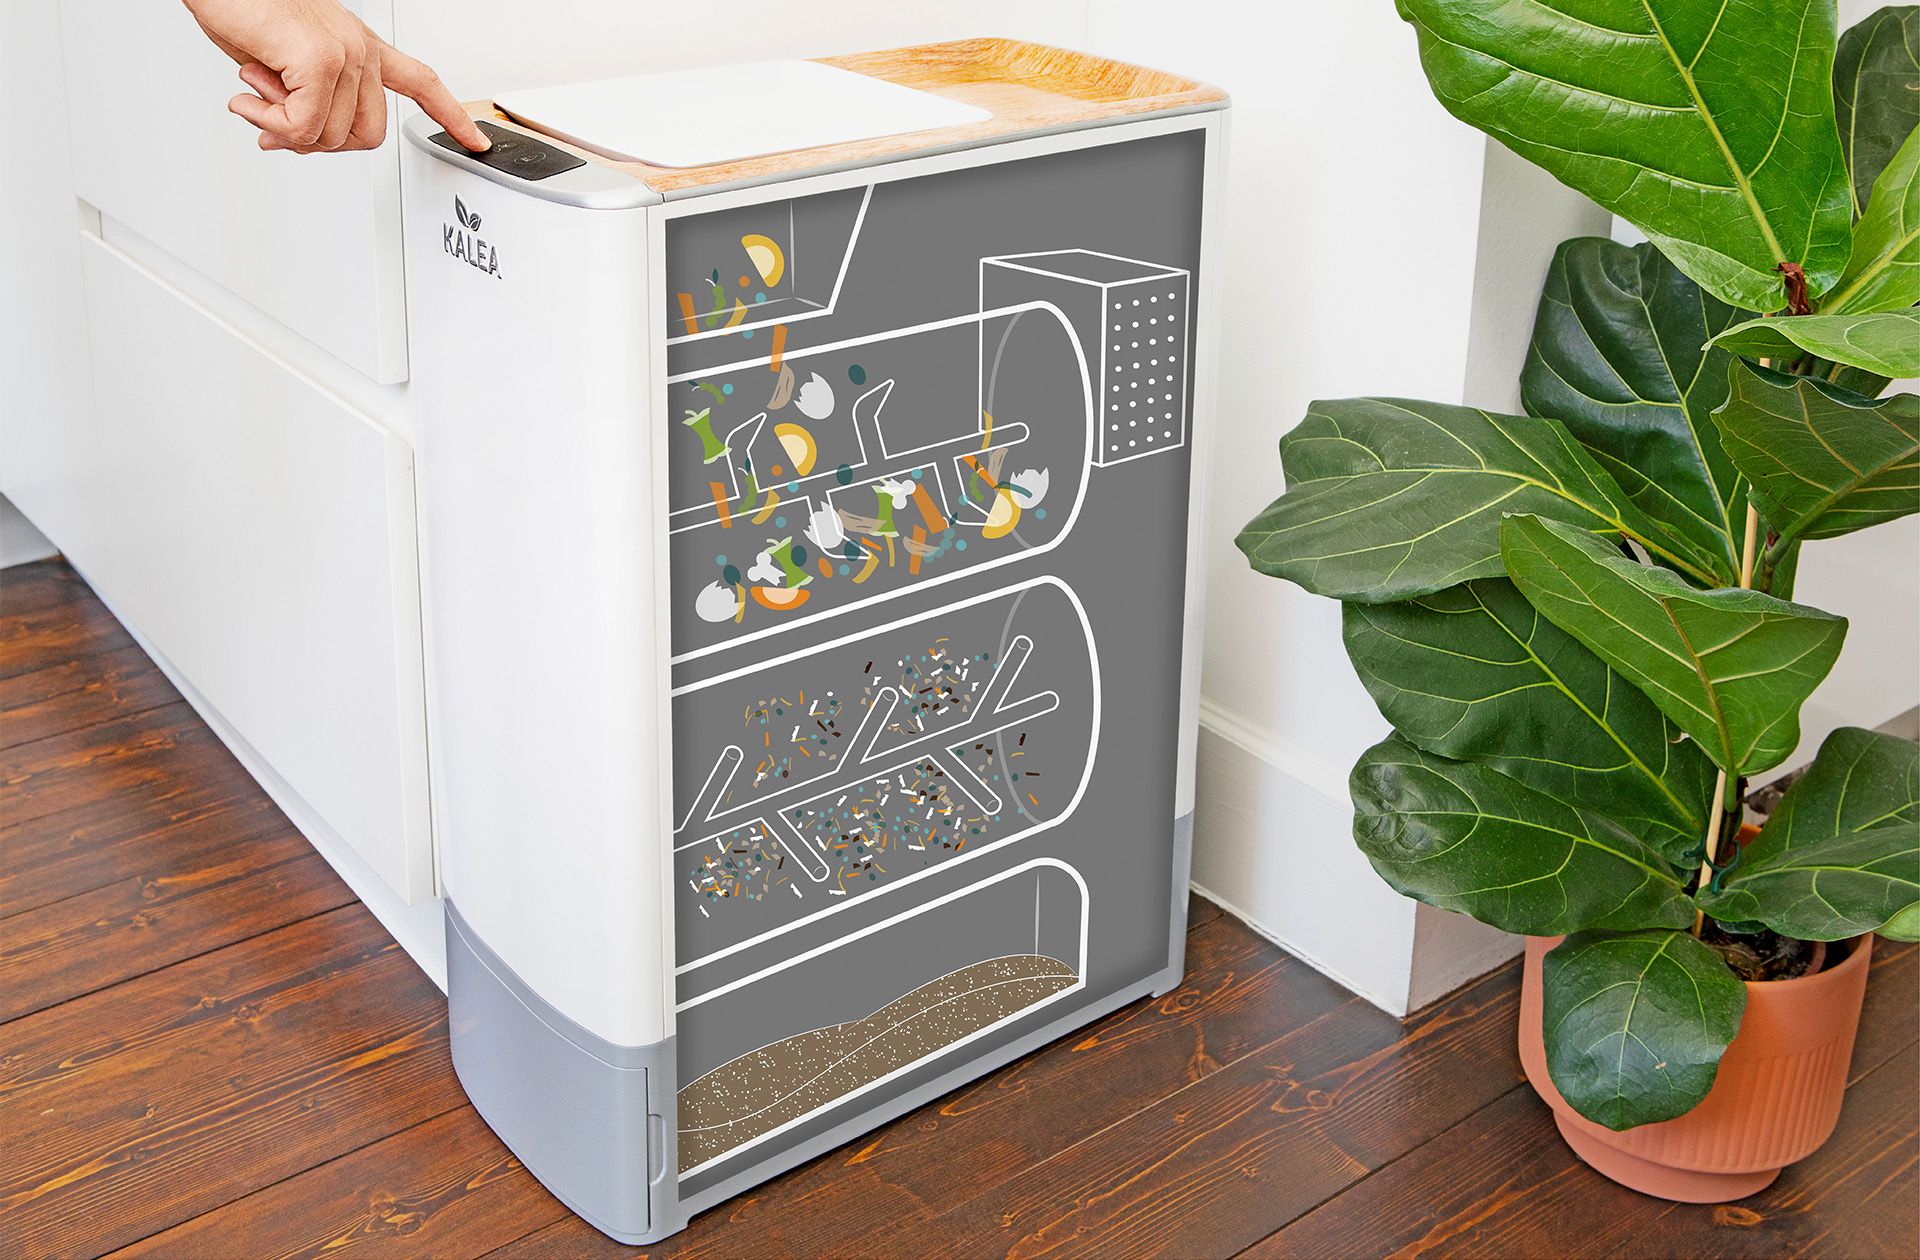 Kalea, a smart kitchen appliance, turns organic waste into nutrient-rich compost for plants in just 48 hours, making it a sustainable solution for kitchen waste disposal in urban households. 